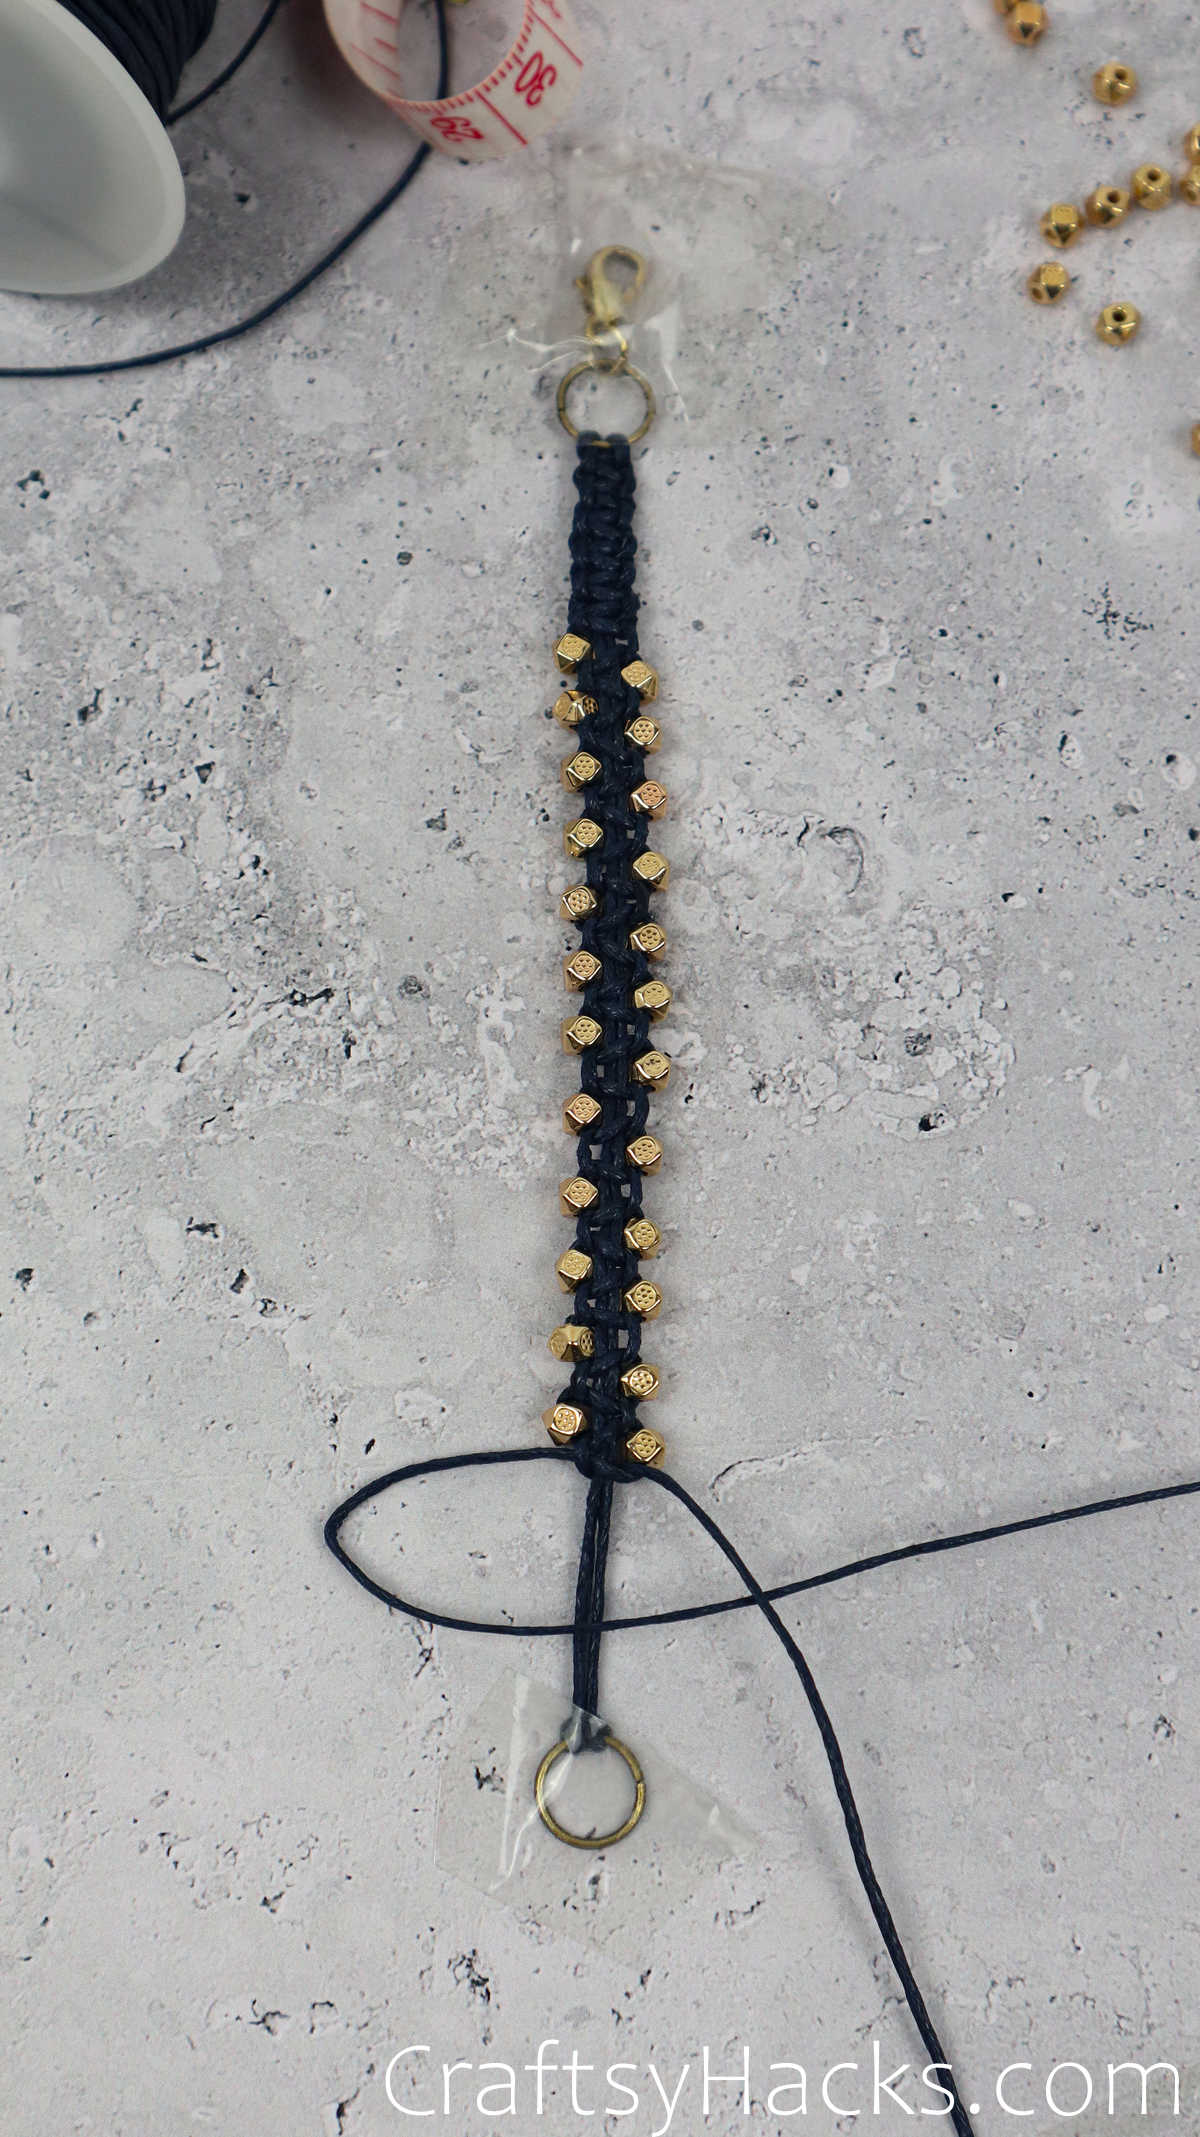 completed macrame knots with beads